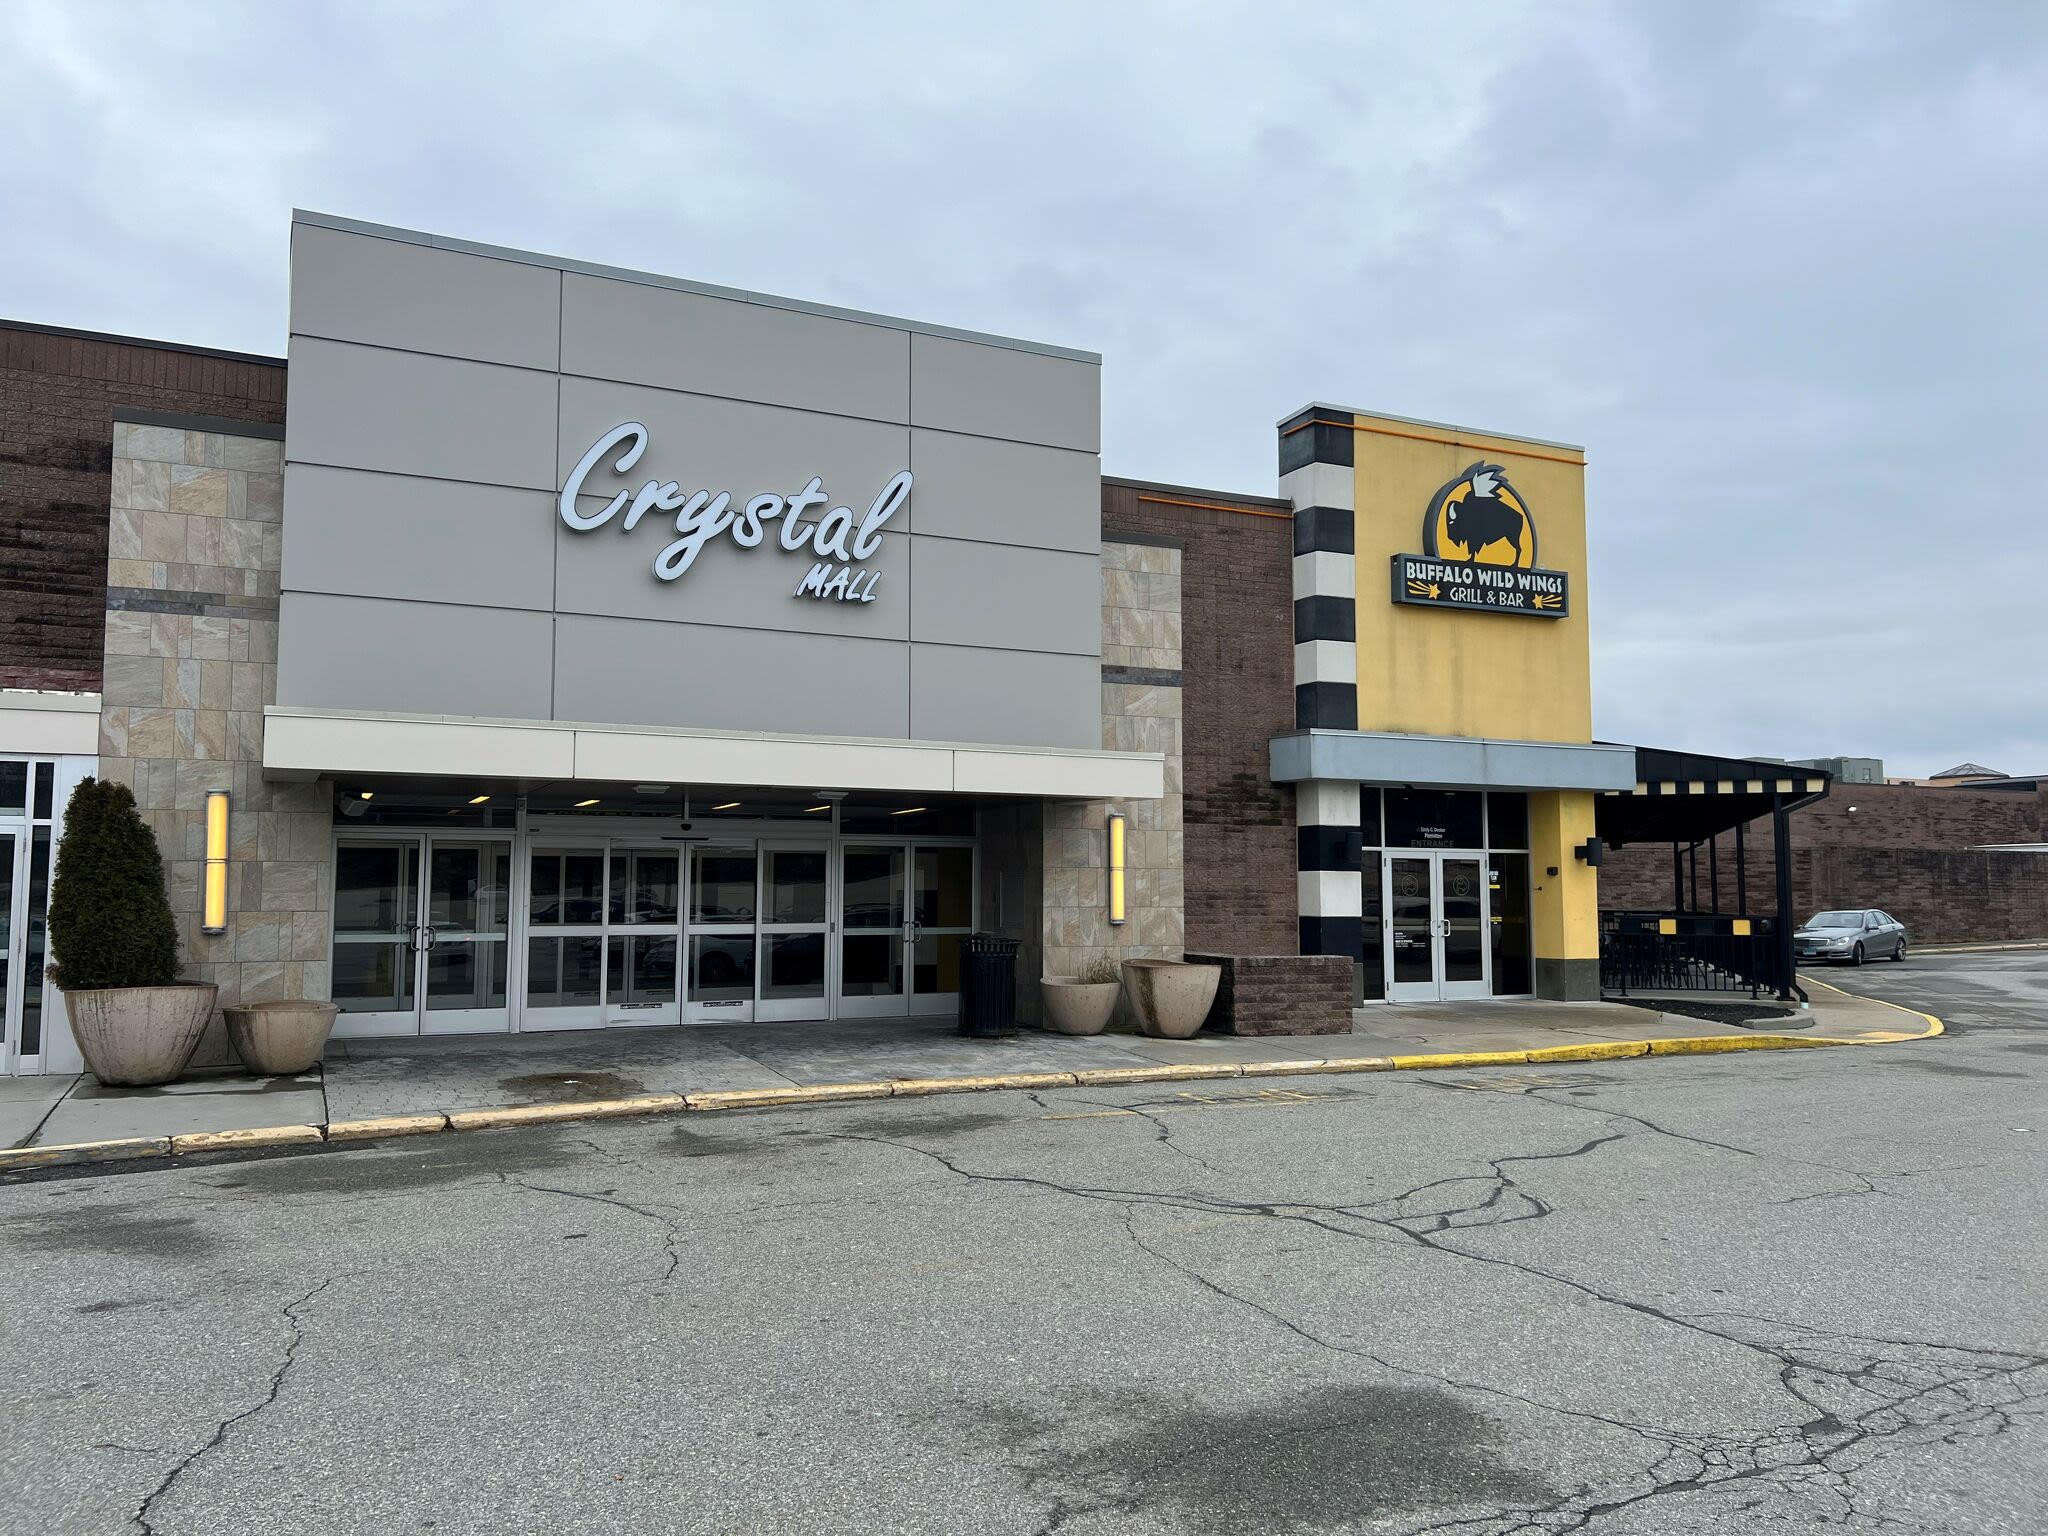 Owner of this Connecticut mall says it could be sold or redeveloped